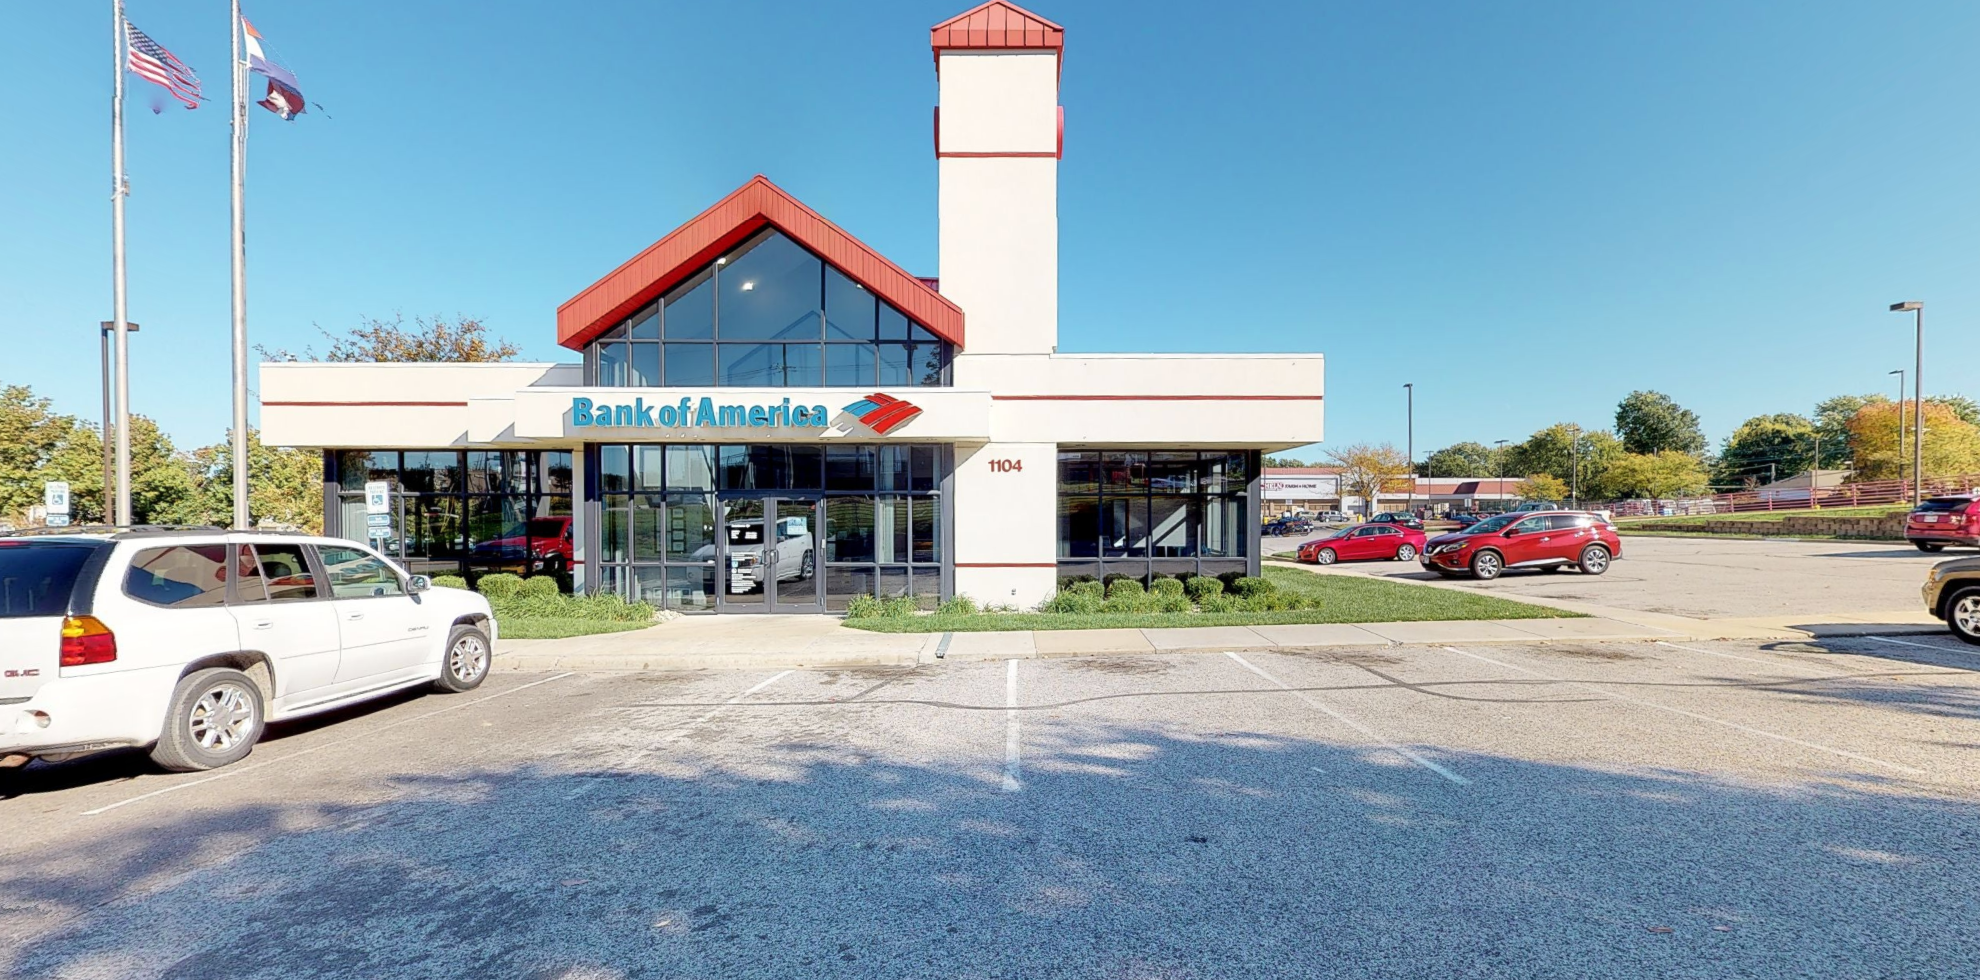 Bank of America financial center with drive-thru ATM | 1104 S 7 Hwy, Blue Springs, MO 64014